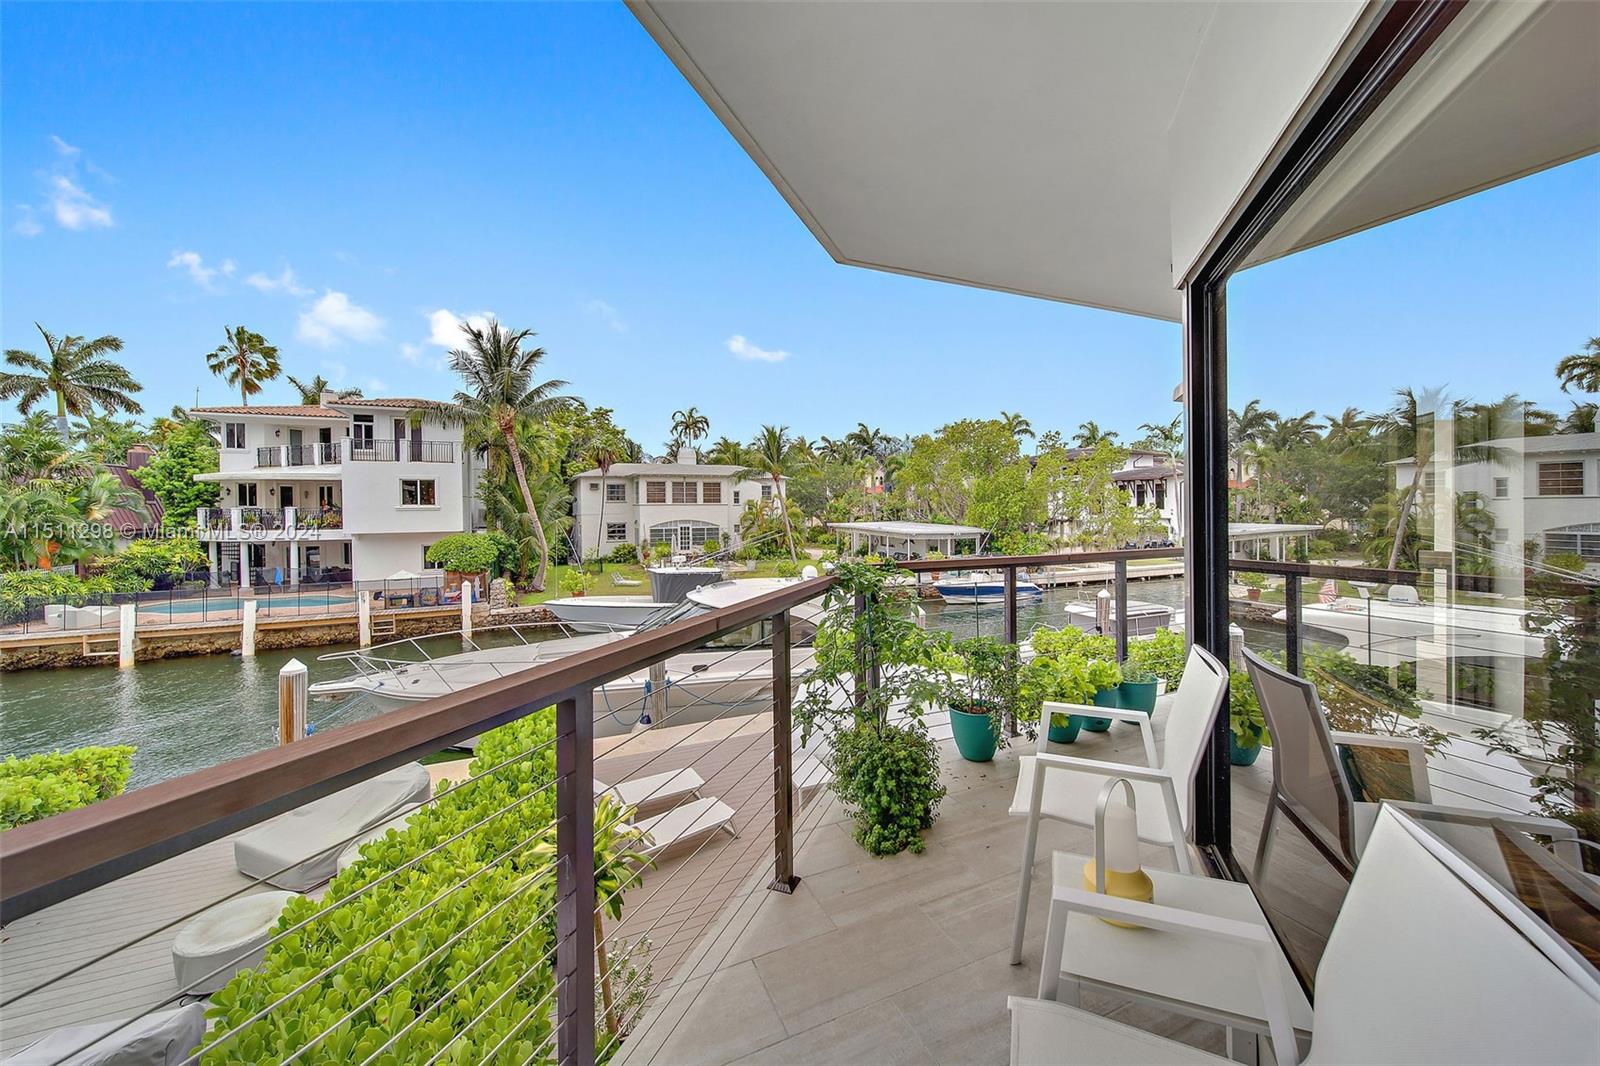 Captivating waterfront townhome in prestigious North Coconut Grove. Located in an ultra-private, recently updated gated community of 8 residences. Light-filled living spaces w/ a modern vibe & walls of glass that open to covered balconies for enjoying bay breezes. Updates include impact glass, smart home features & spa-like baths. 1st level flex space can convert to 3rd BR. Sleek, European-style kitchen offers quartz countertops, stainless appliances & breakfast bar. Stunning primary suite w/ vaulted wood ceilings & balcony with water views. Experience idyllic outdoor living on the expansive private deck overlooking your own 40’ boat slip w/ no bridges to the bay & ocean. Just minutes to downtown, Brickell, Key Biscayne and to world-class shopping & dining in the historic Grove village.